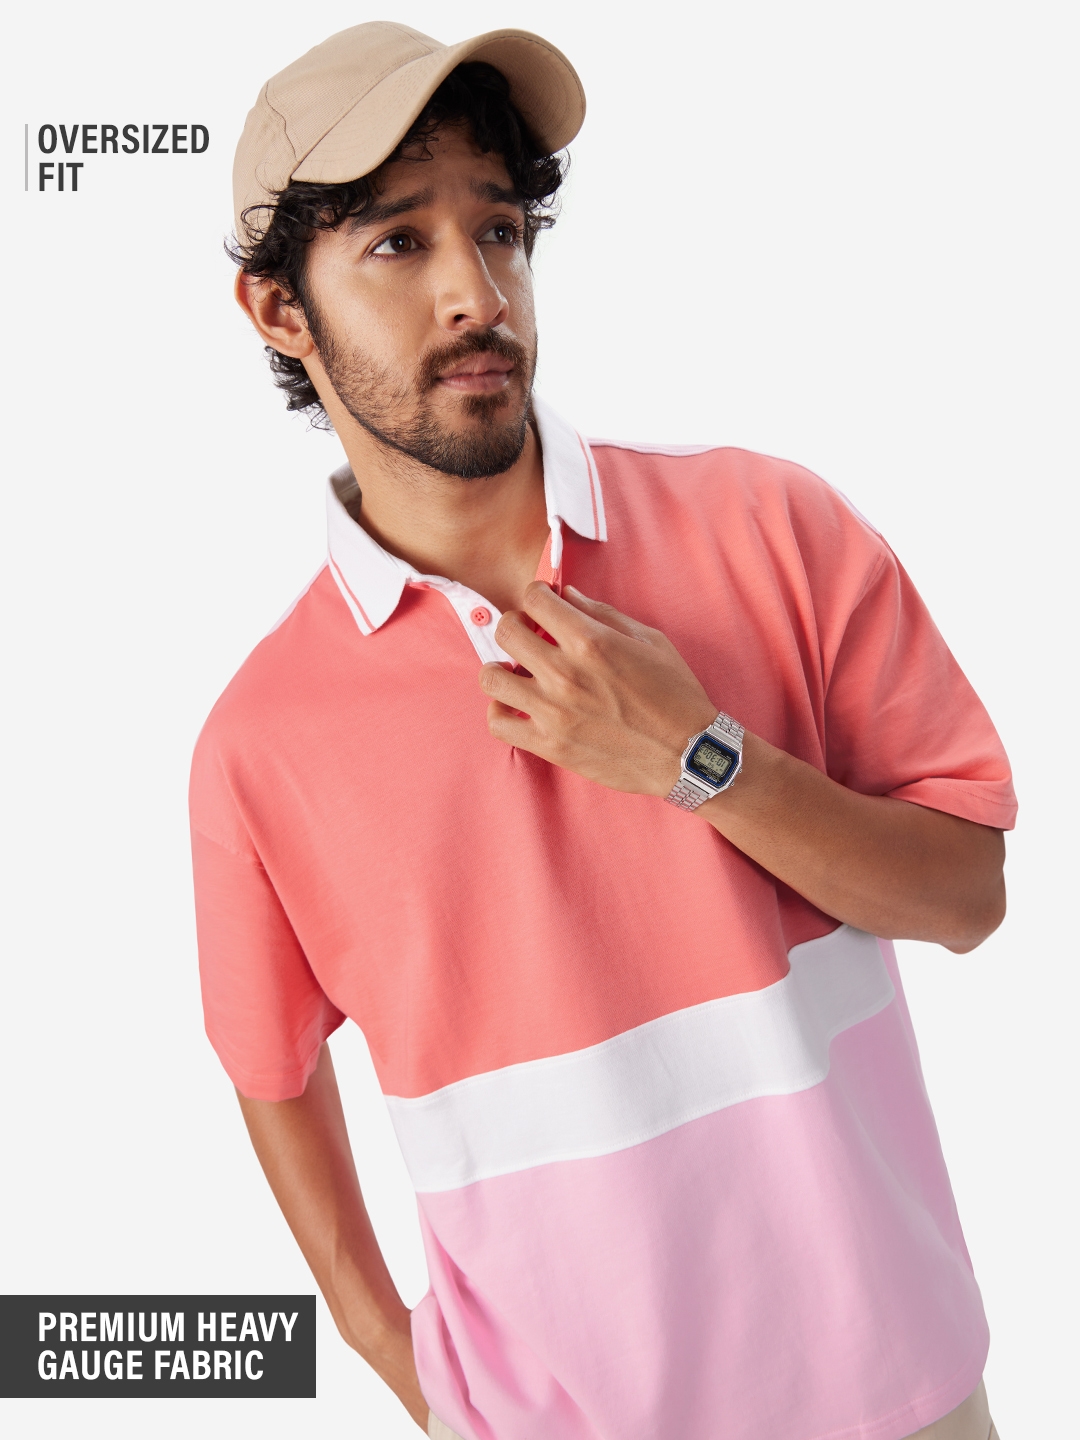 The Souled Store | Men's Solids: Watermelon, White and Pink (Colourblock) Oversized Polo T-Shirt